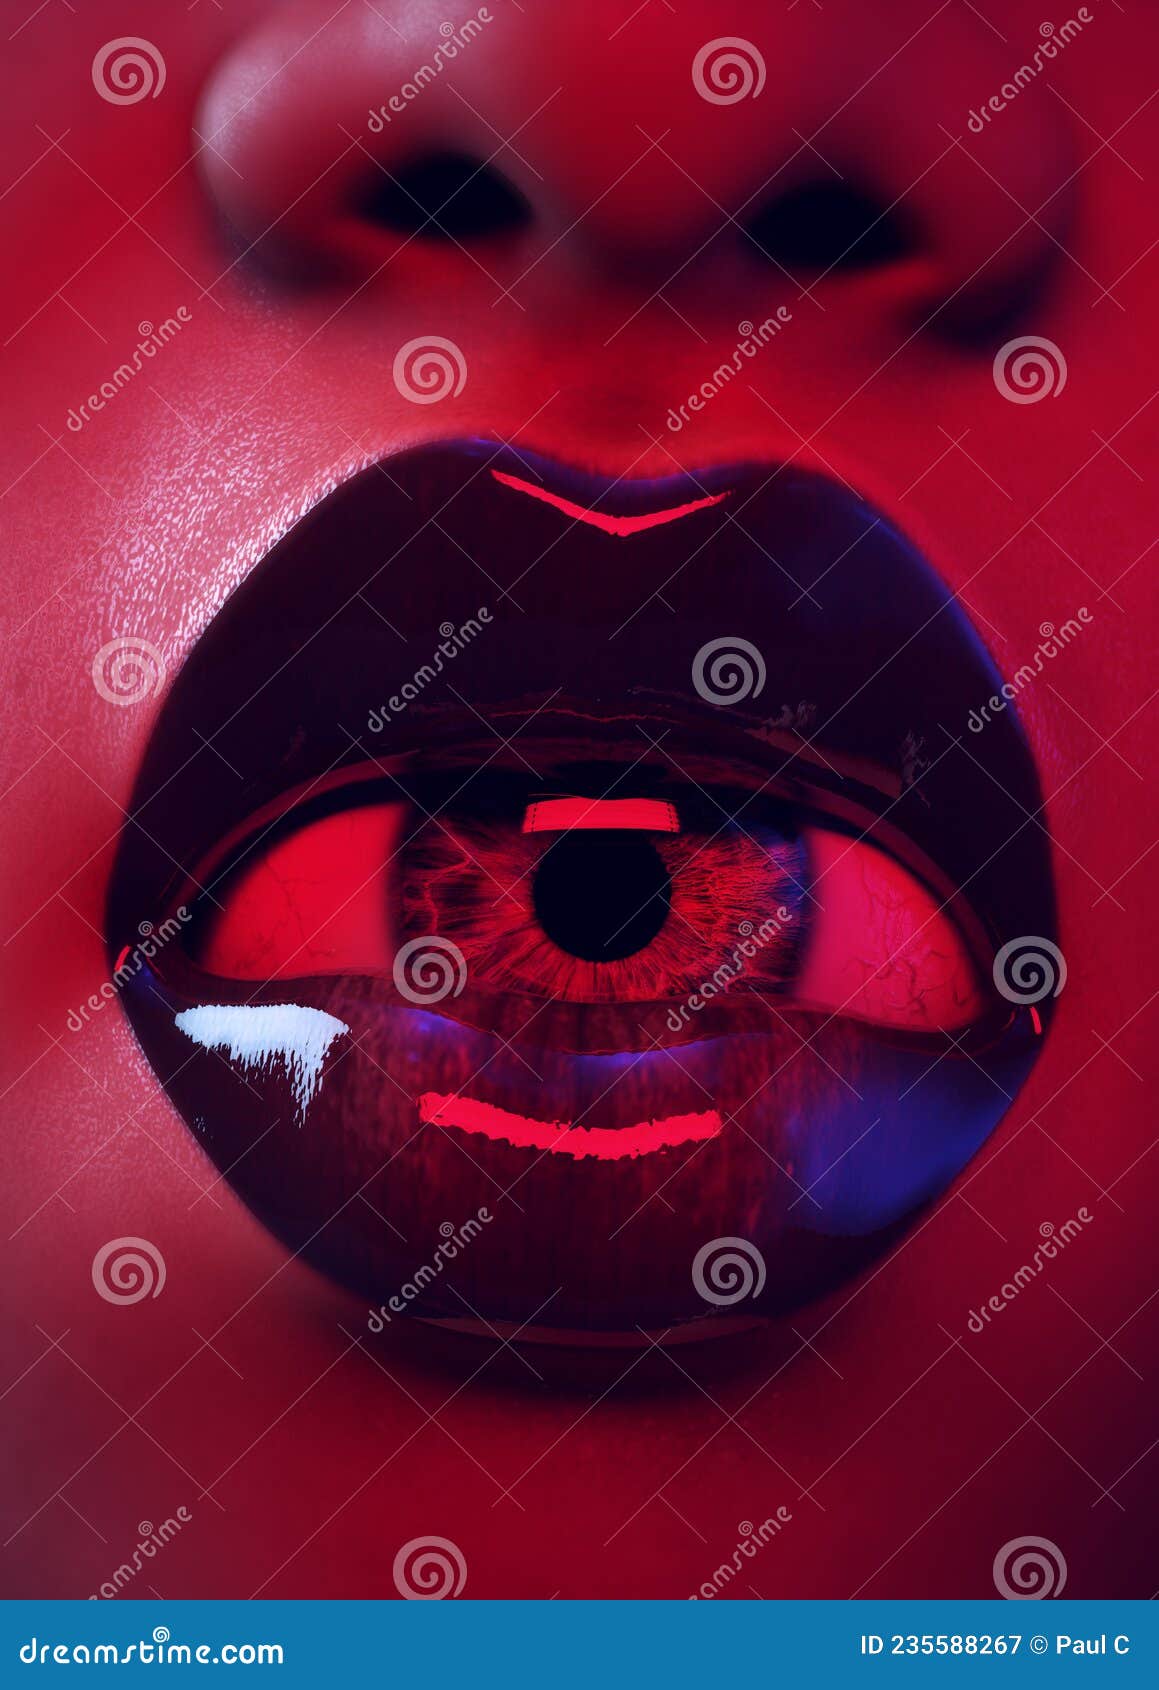 Red Pink An Blue Horror Alien Woman With Open Mouth With Wet Eyeball